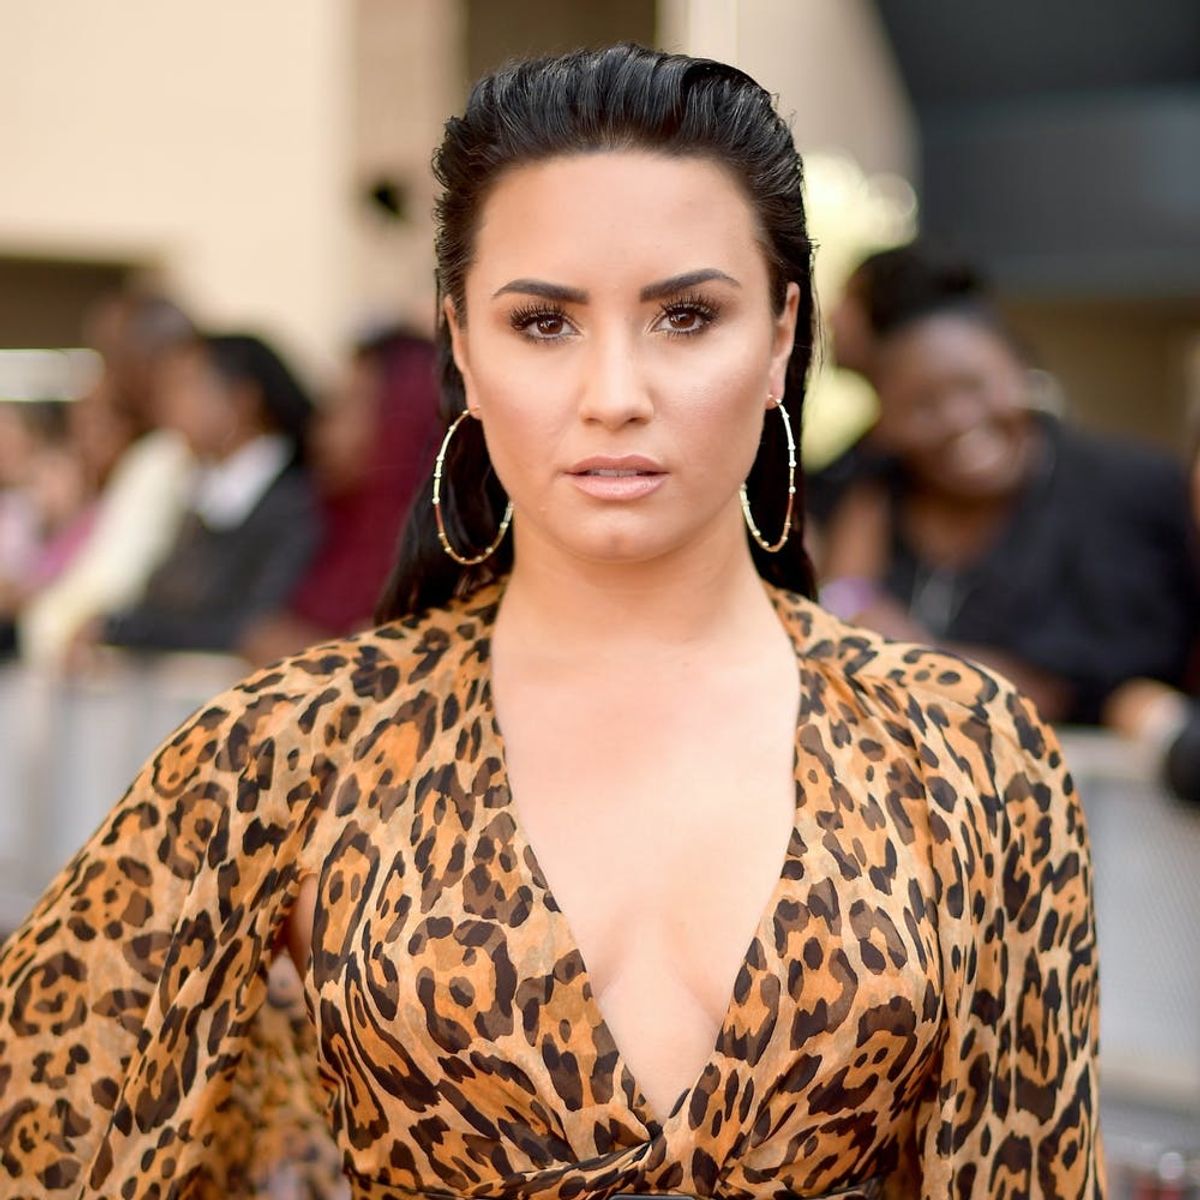 Demi Lovato Speaks Out After Reported Overdose: ‘I Will Keep Fighting’